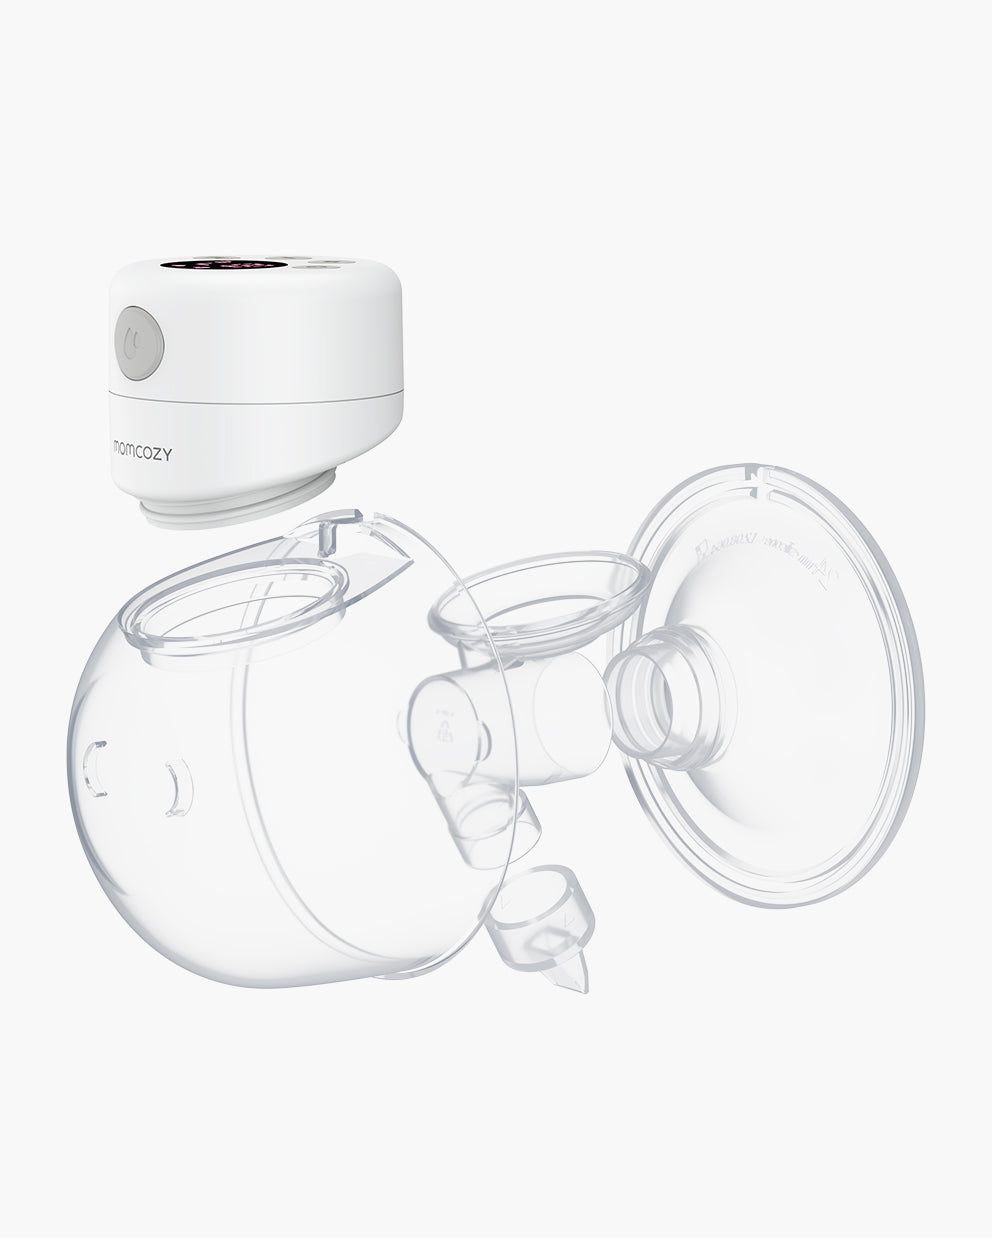 Momcozy Double Wearable M1, LCD Hands-Free Breast Pump with 3 Modes and 9  Levels, Low Noise & Painless Pumping, Portable All-in-One Breastfeeding  Breast Pump, 27mm (2 Count, Grey) in Saudi Arabia